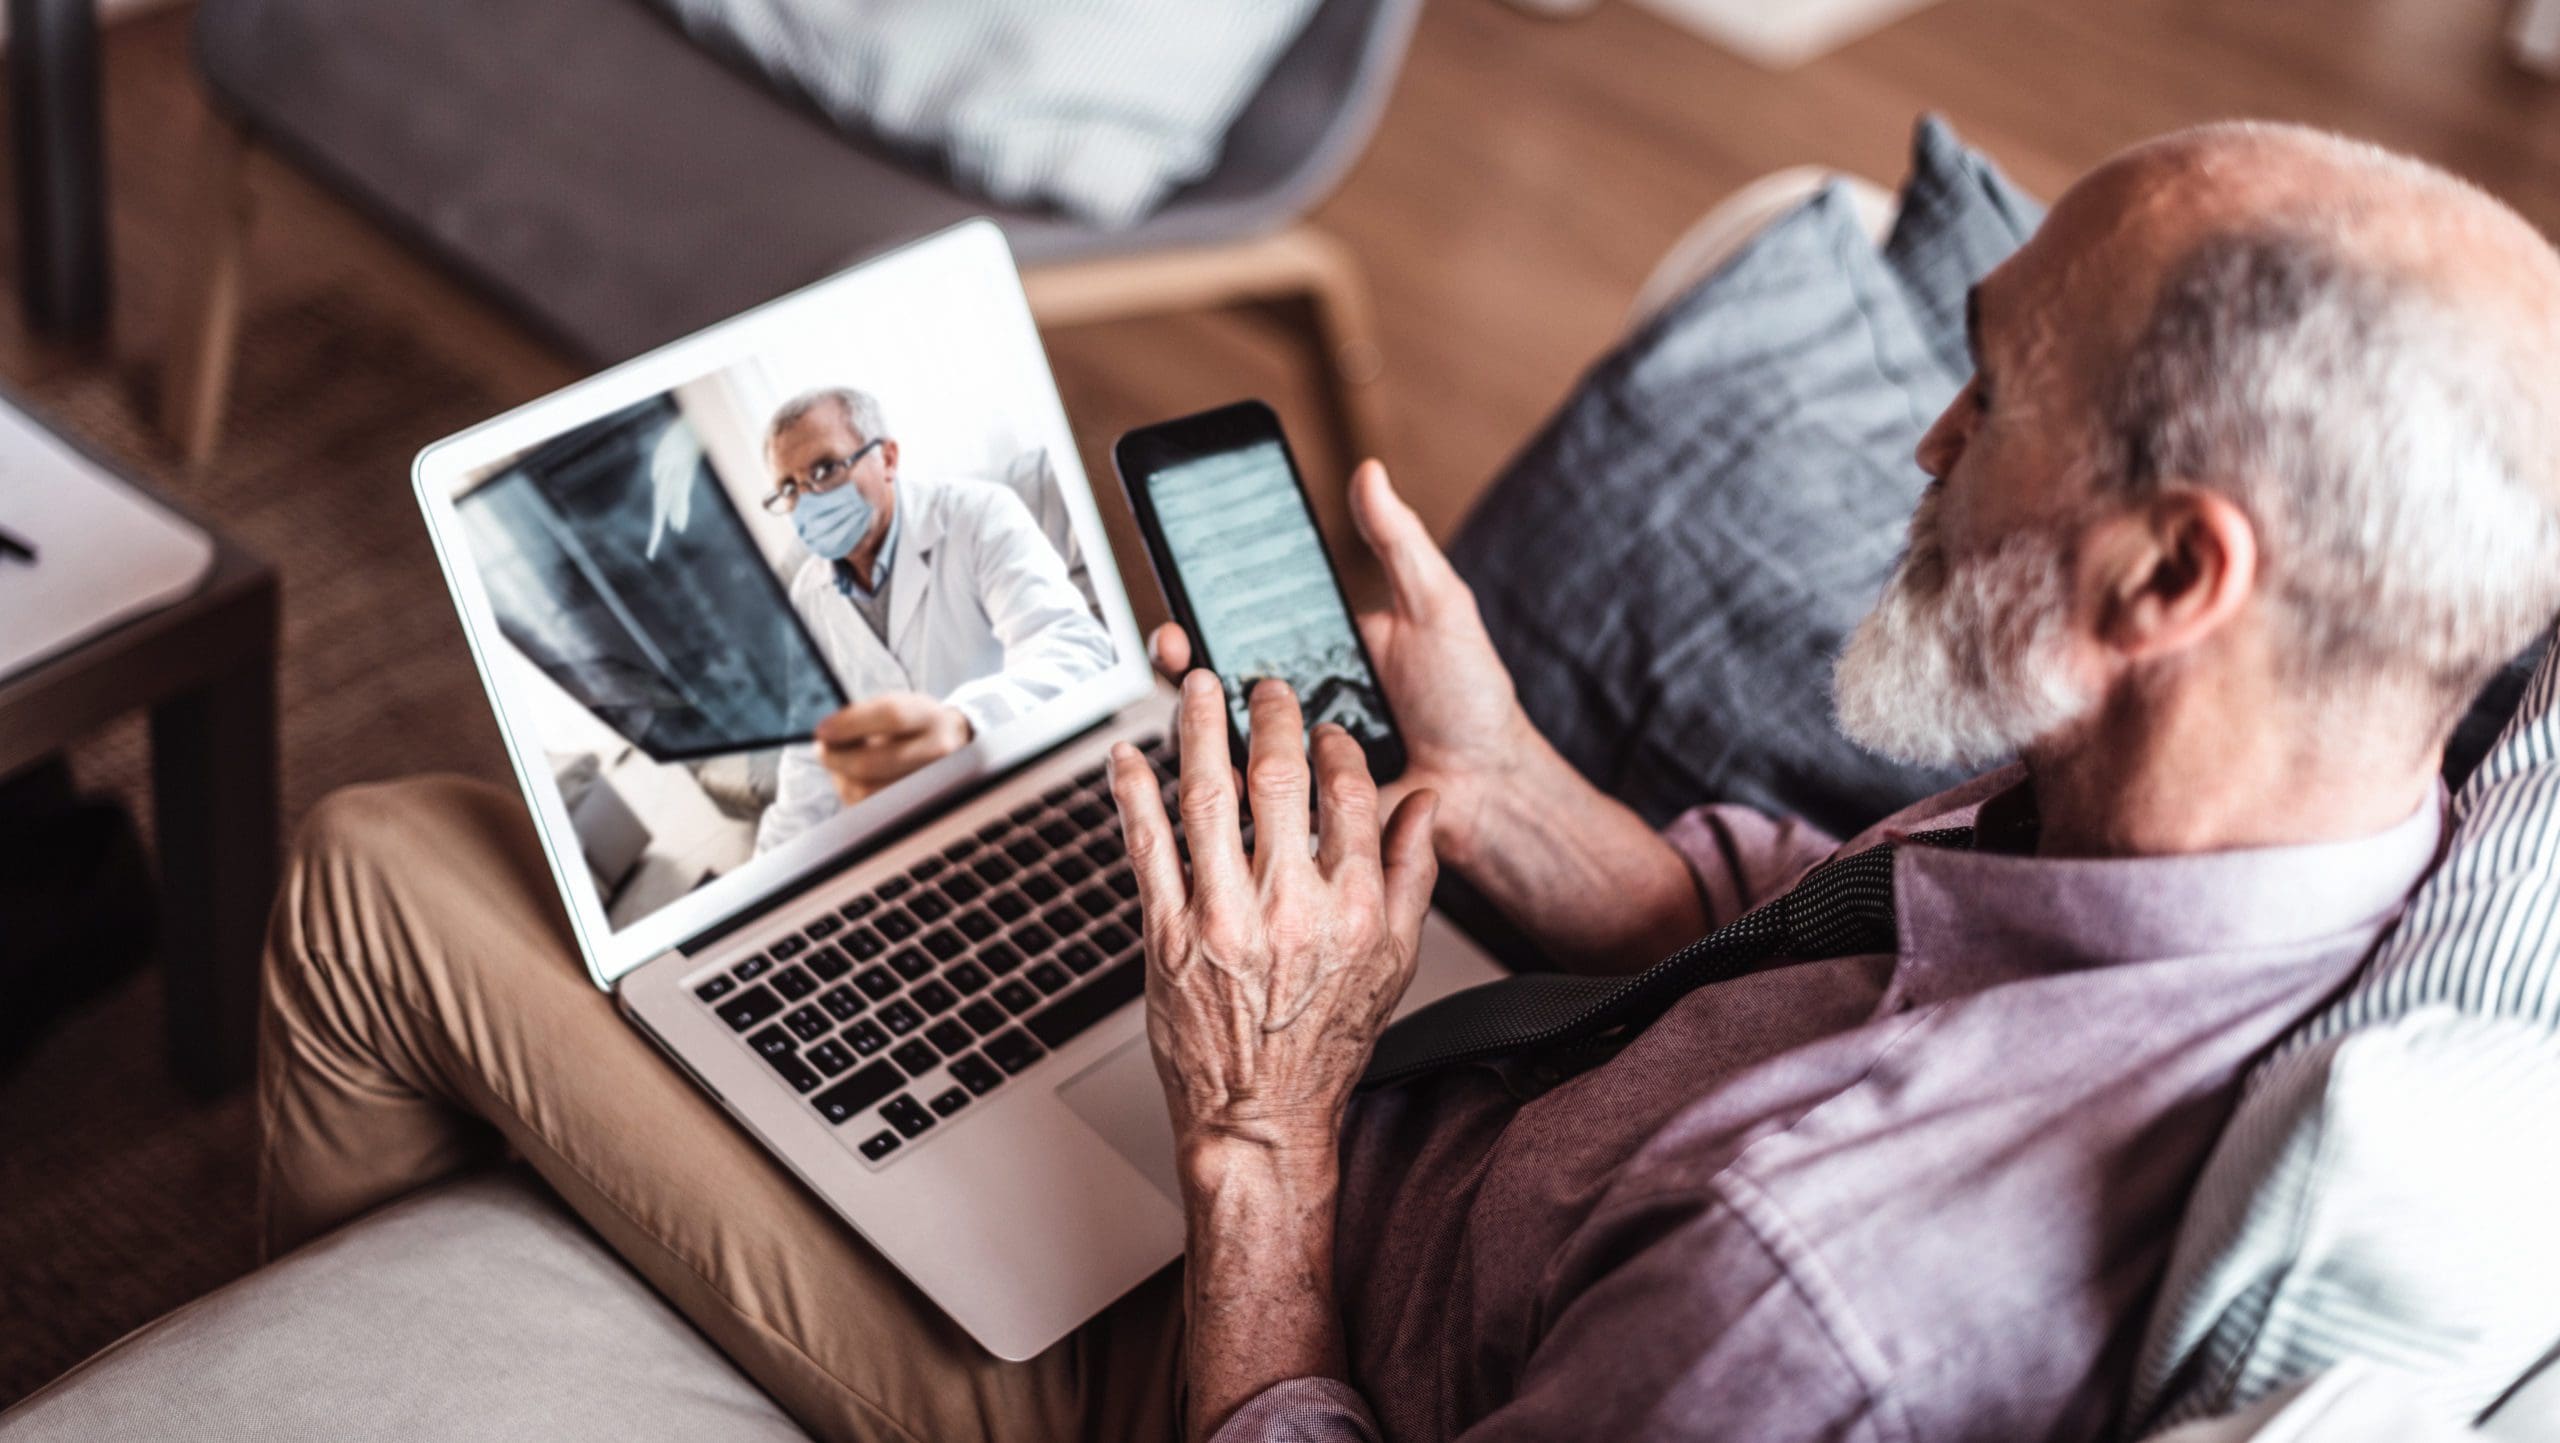 Leveraging technology and prioritizing personal connections, we deliver acute care to the home and bring individuals to better health.